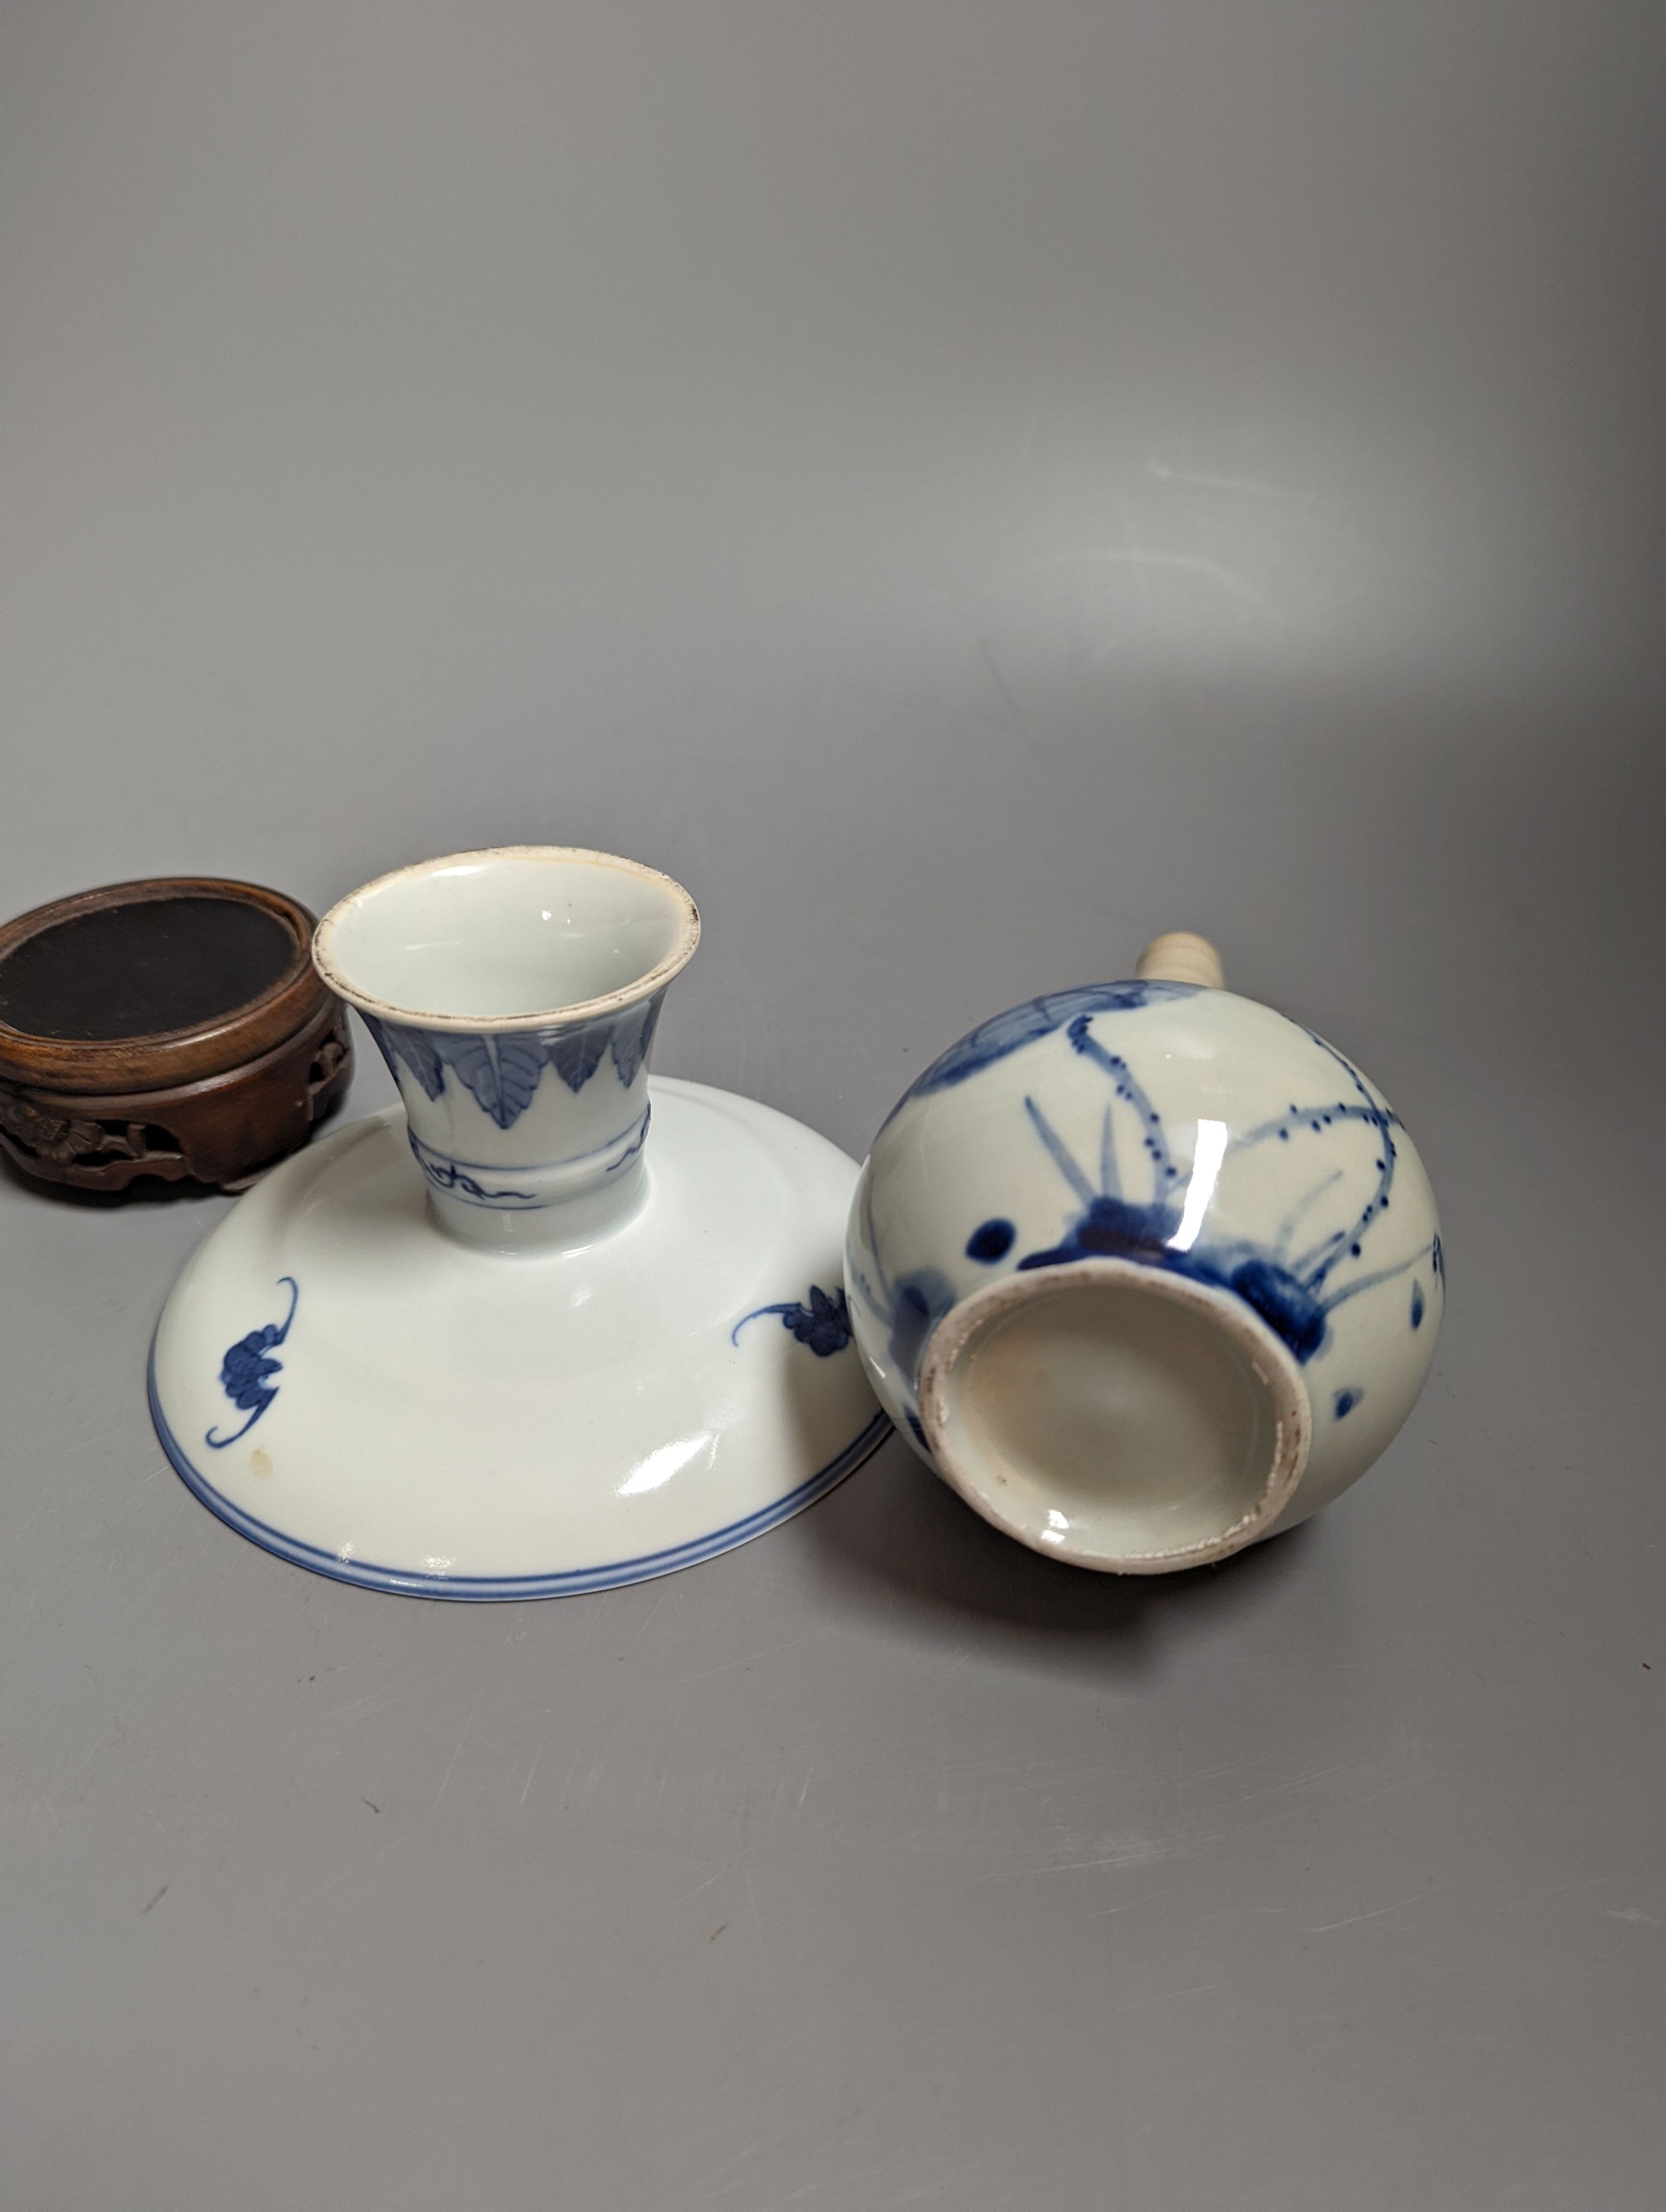 A 19th century Chinese blue and white stem dish, 14cm diameter and a Japanese or Korean art pottery bottle vase, 19cm (2)